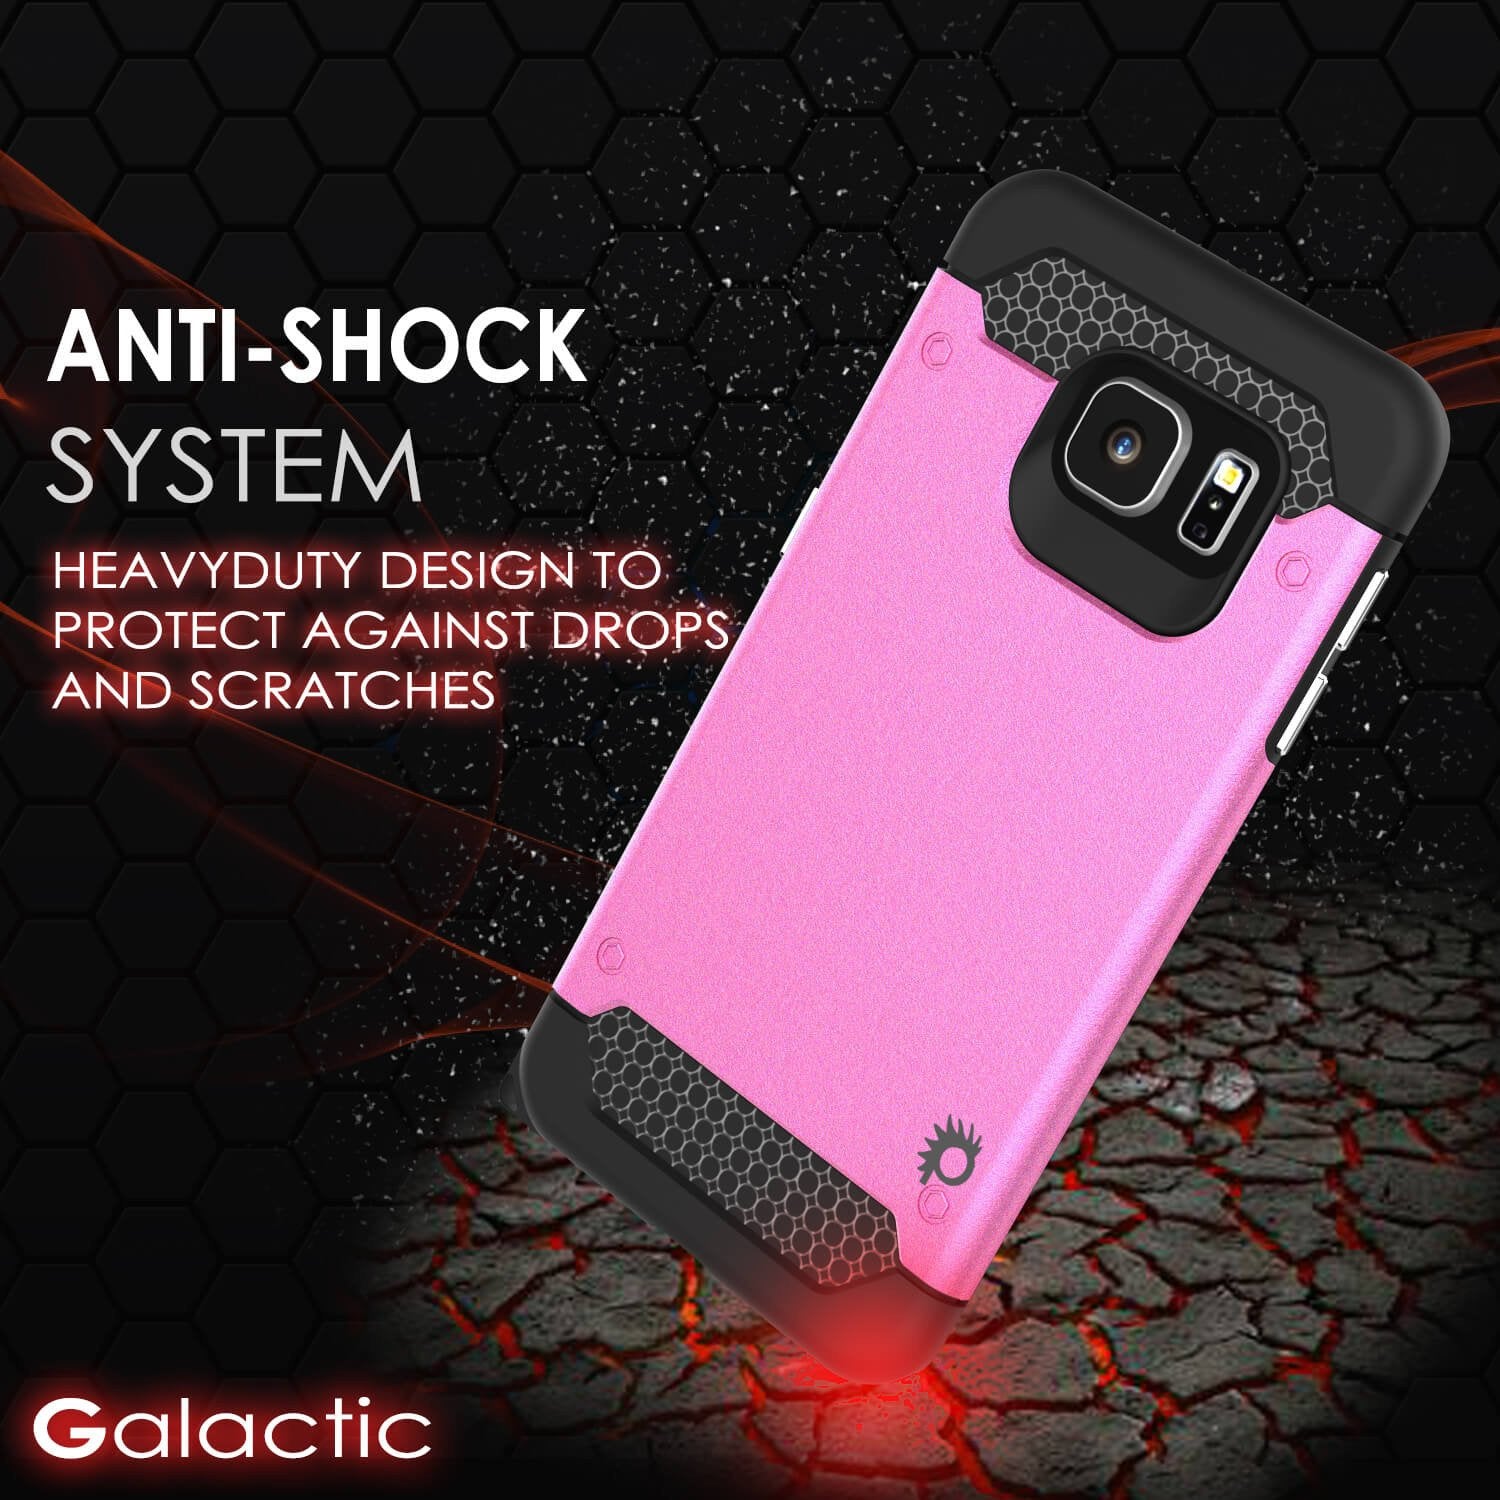 Galaxy s6 EDGE Case PunkCase Galactic Pink Series Slim Armor Soft Cover w/ Screen Protector - PunkCase NZ